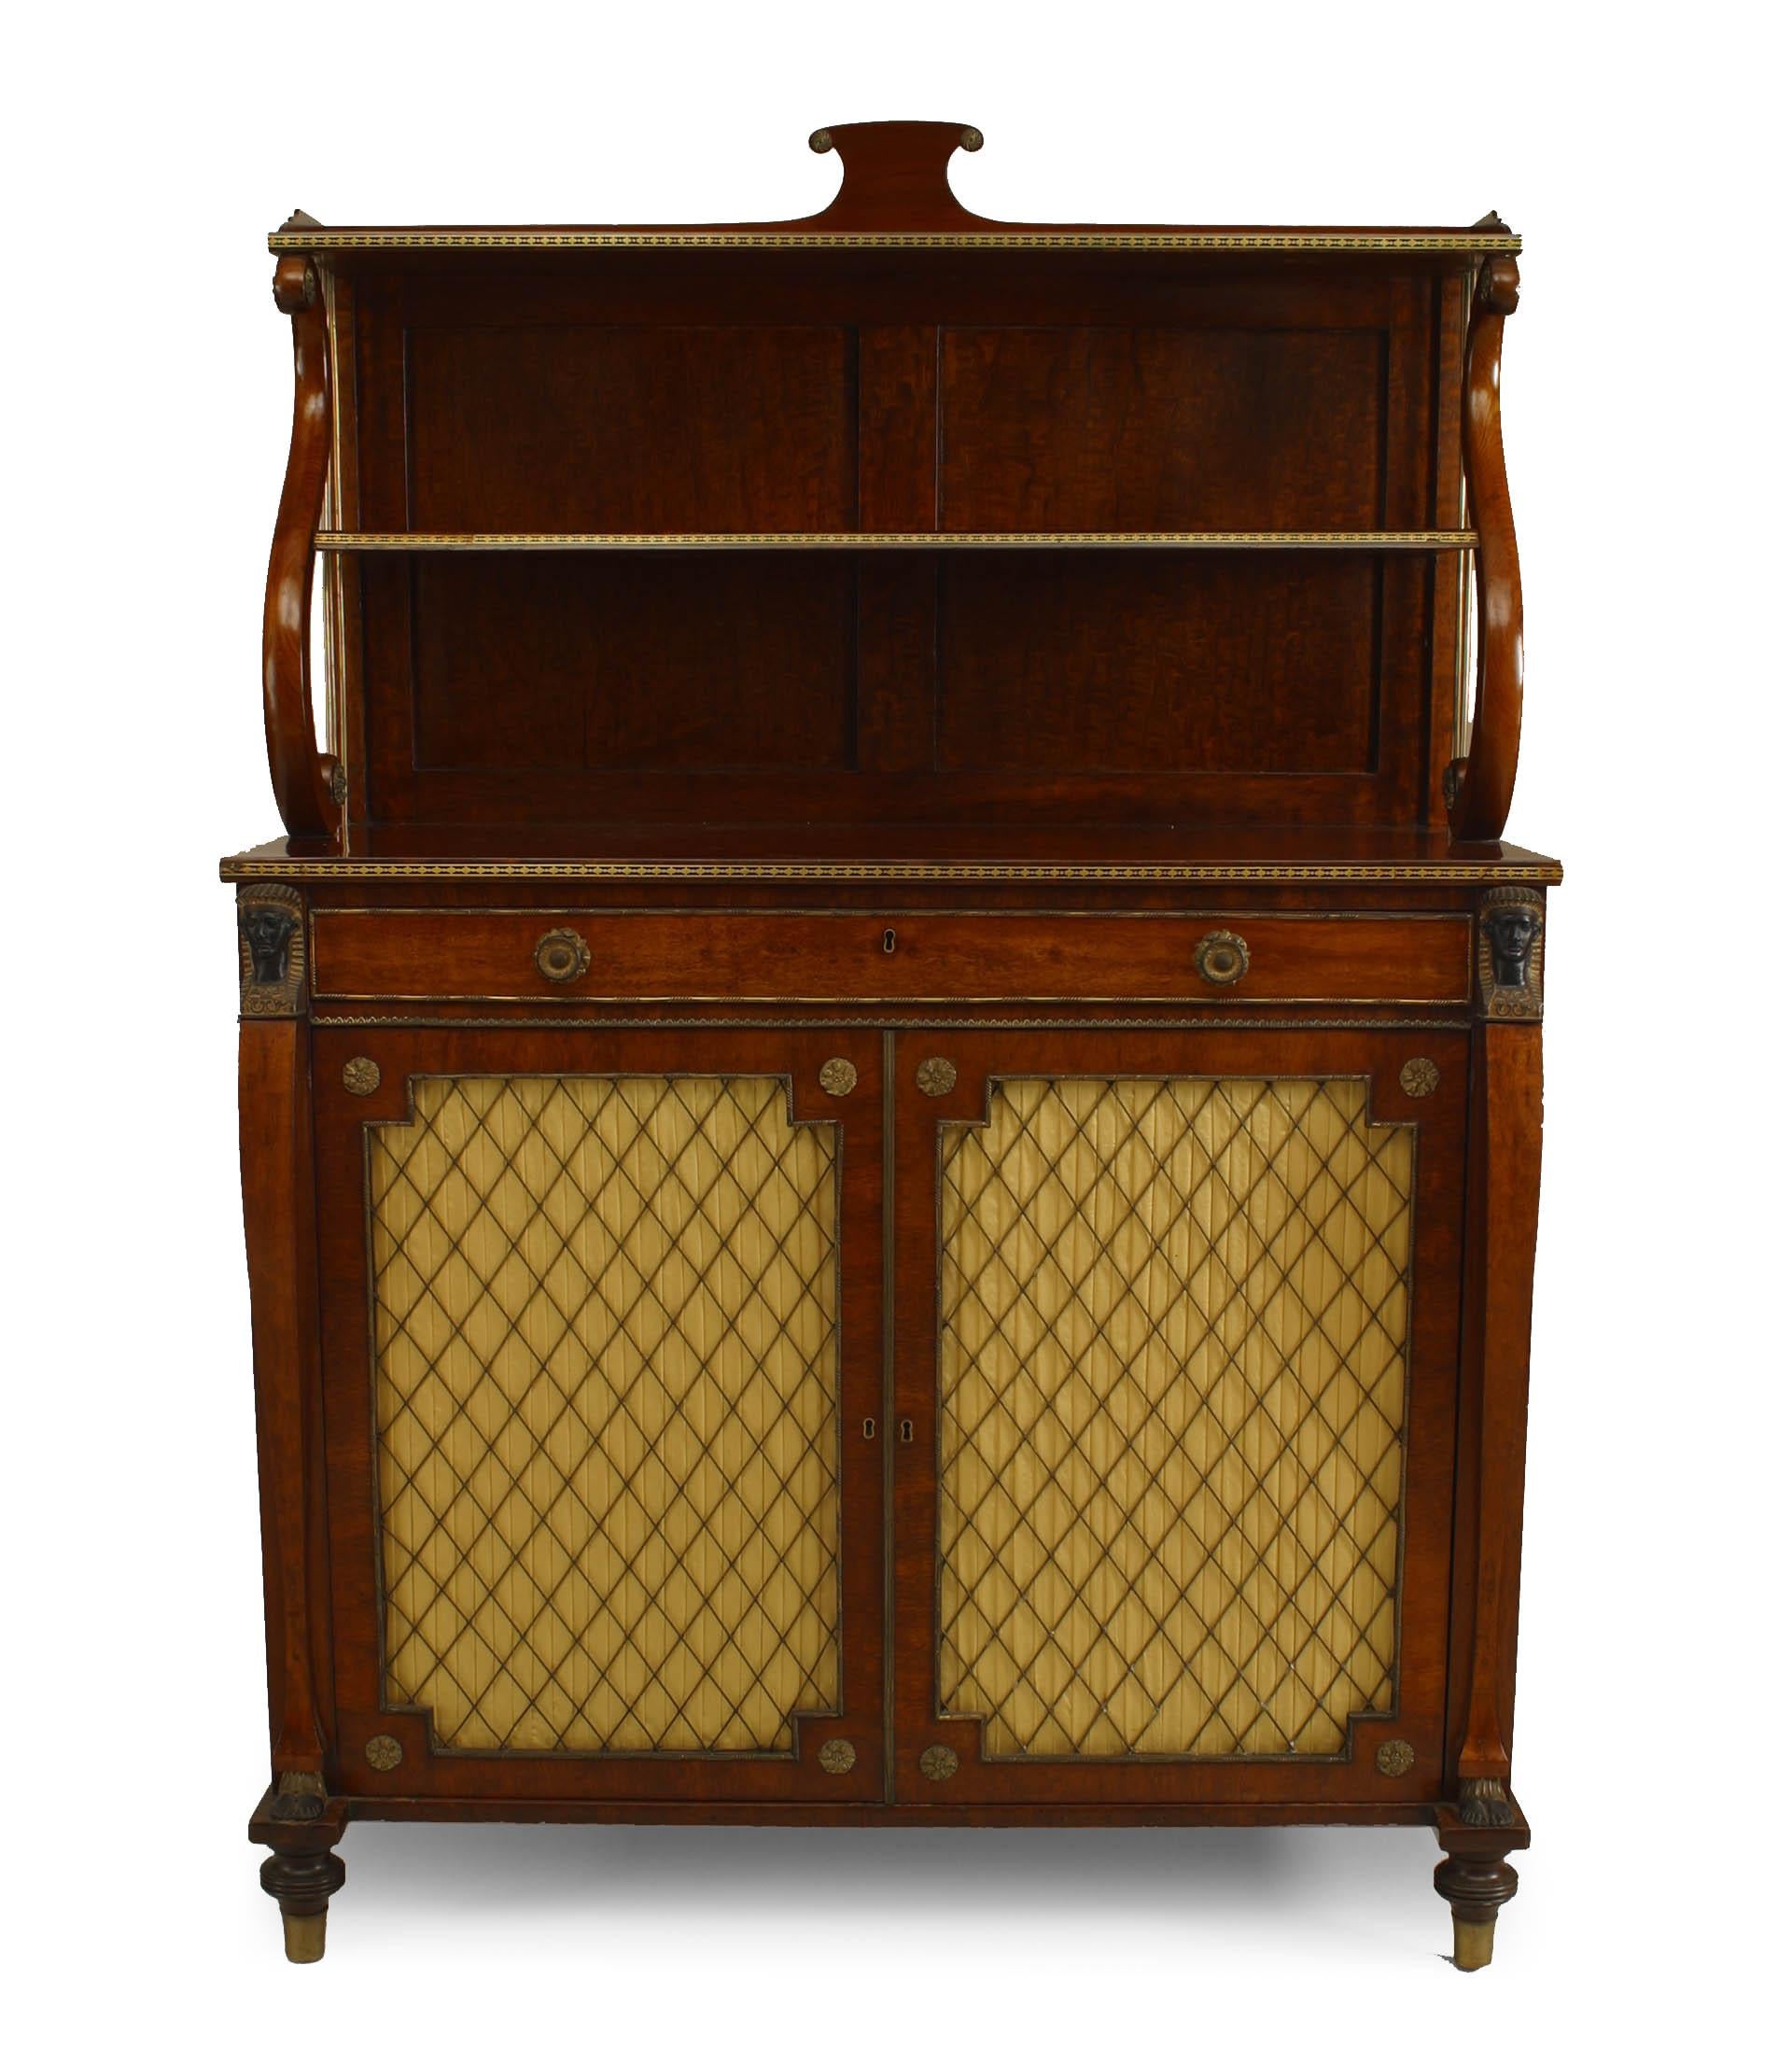 English Regency rosewood secretaire cabinet with two upper shelves supported by a lyre form over a secretaire drawer fitted with a leather writing surface above a pair of grill doors.